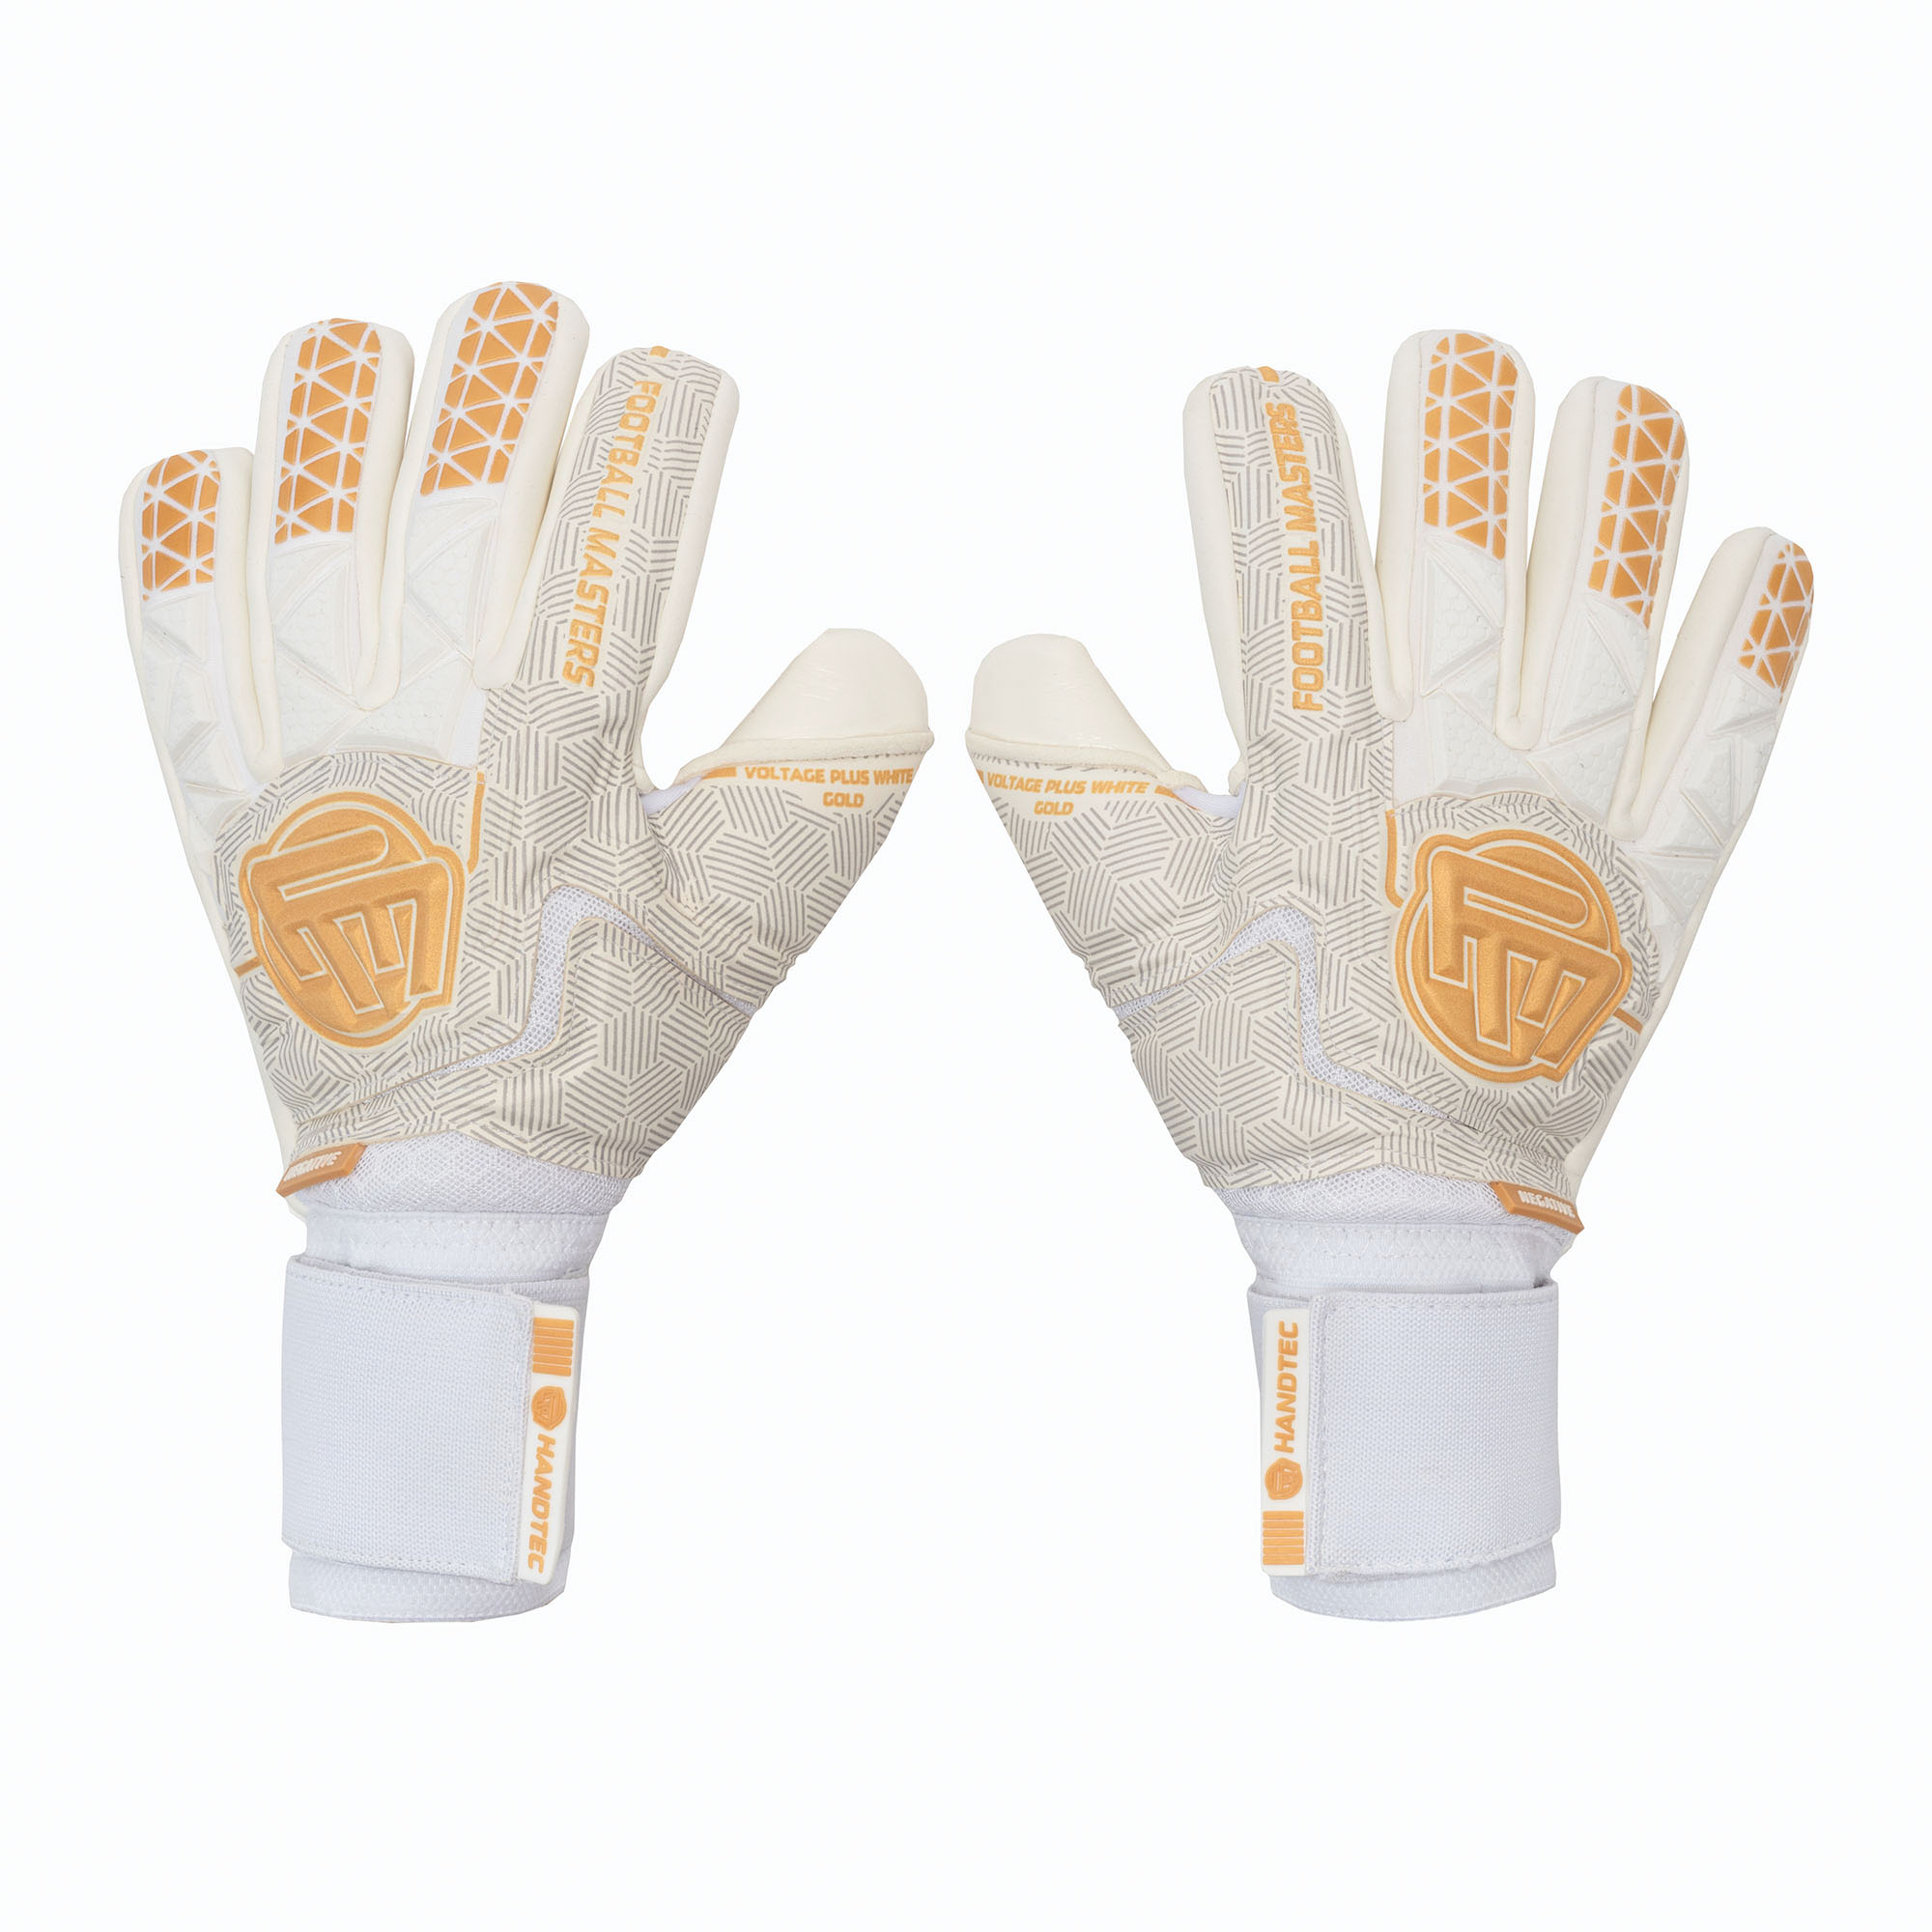 Football Masters Voltage Plus RF v 4.0 Goalkeeper Gloves White and Gold 1172-4